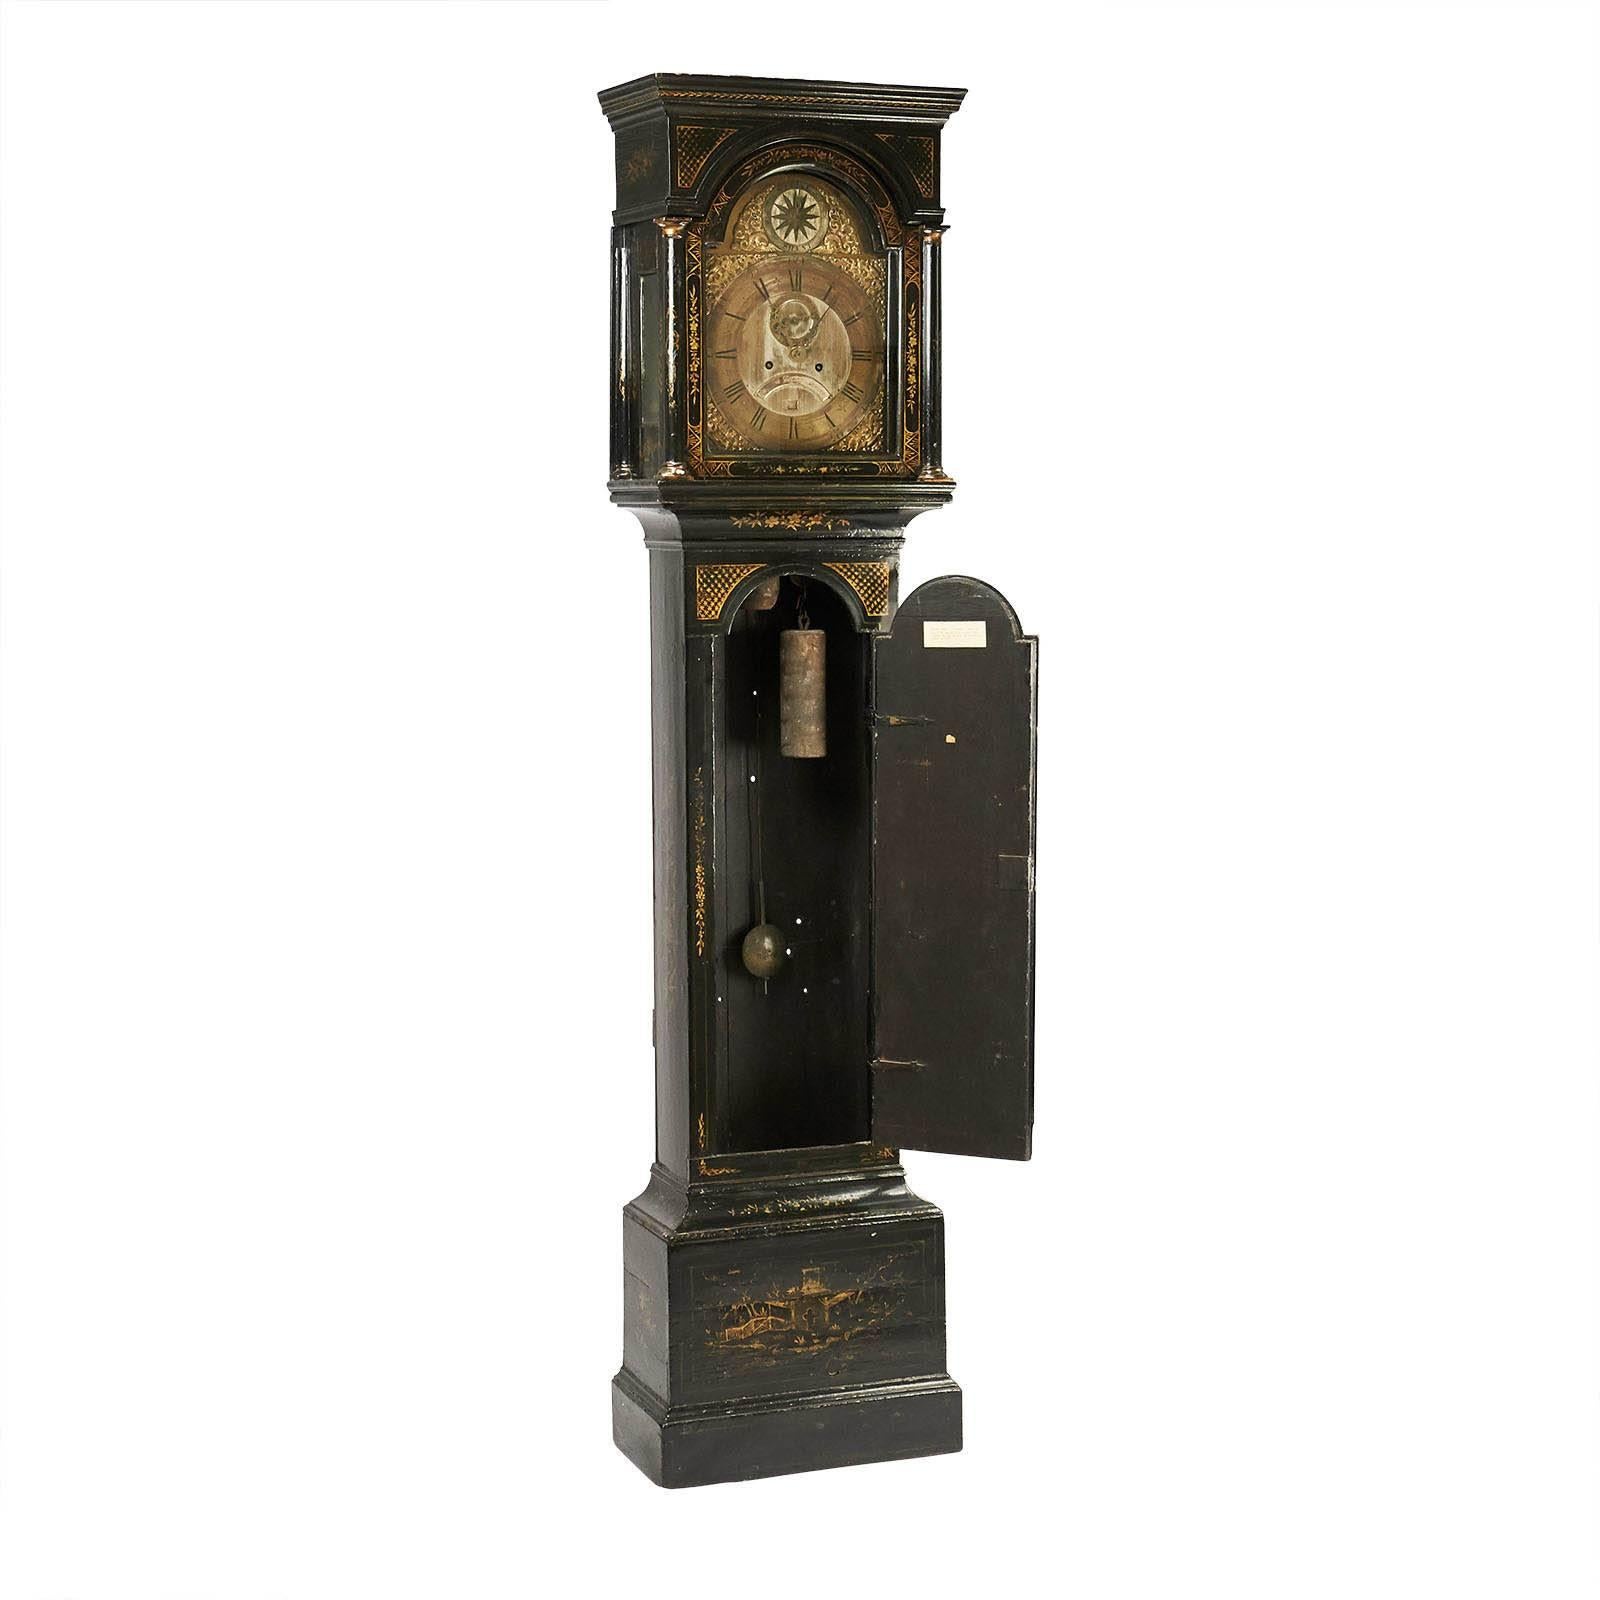 This is a good George II tall case clock retaining an early Japanned surface in the Chinese motif. The case was restored some time ago, and is in Fine condition. The movement is an 8 day brass works by a good recognized English London Clock maker.